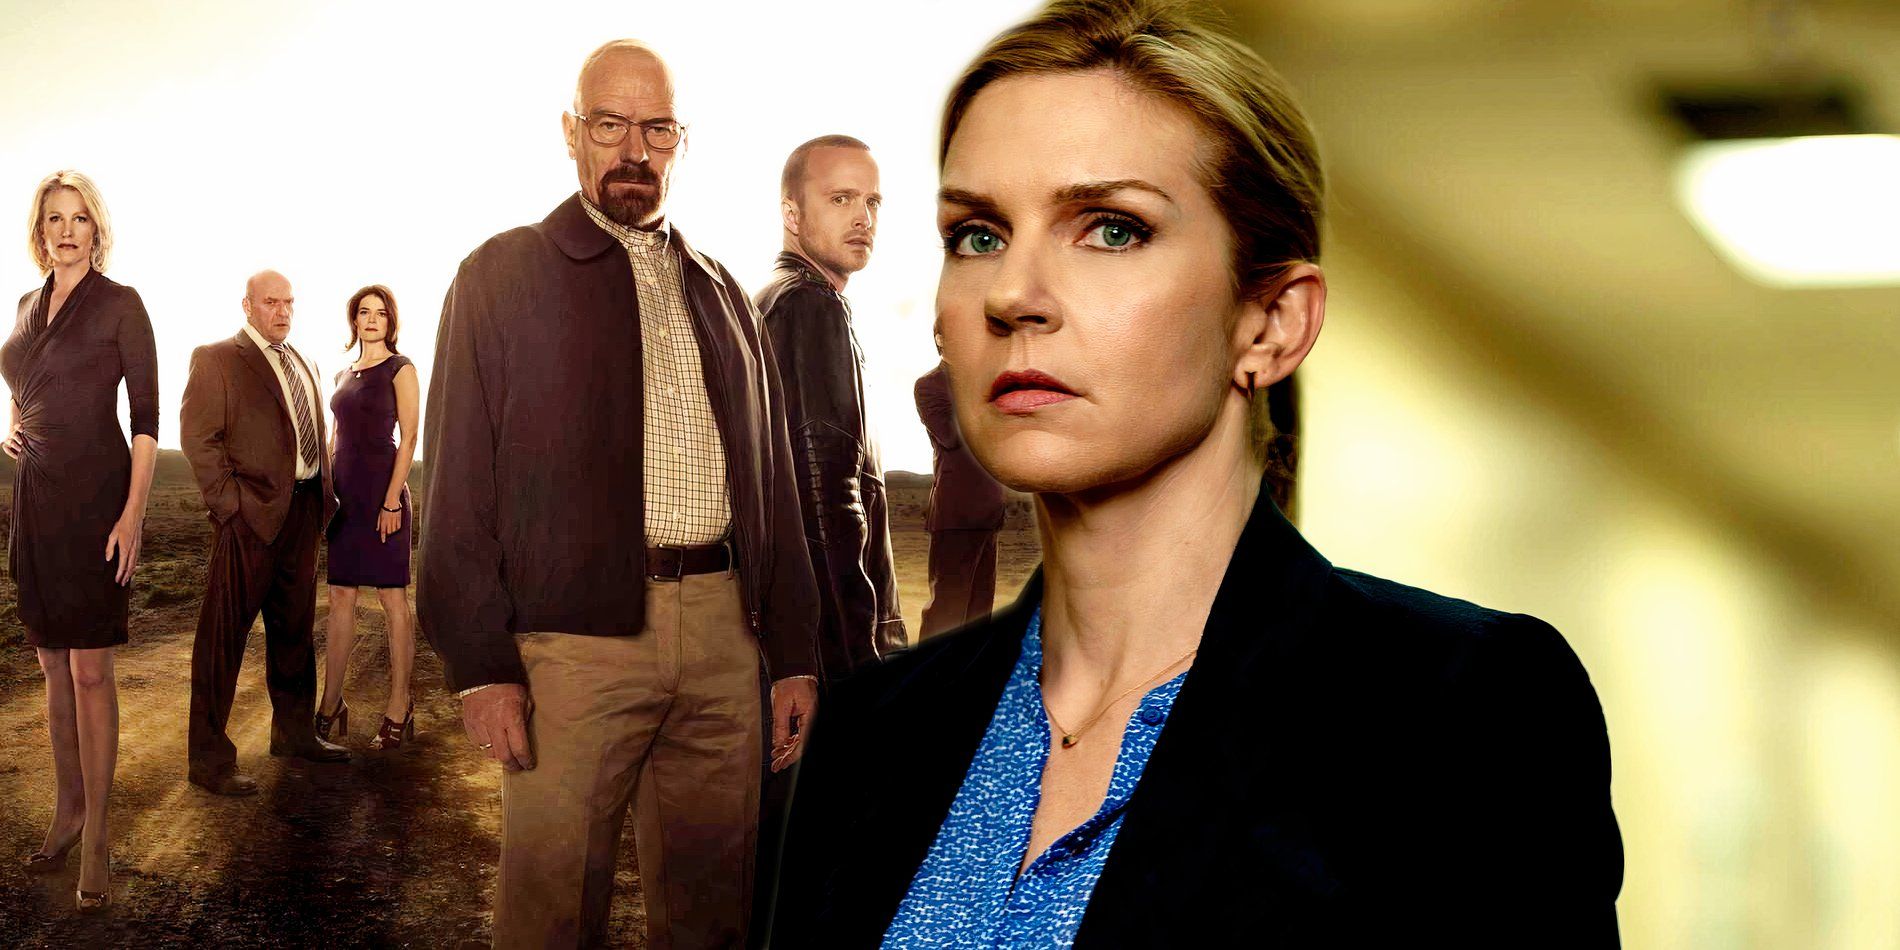 Rhea Seehorn as Kim Wexler and the Breaking Bad characters posing such as Skylar, Walter, and Jesse